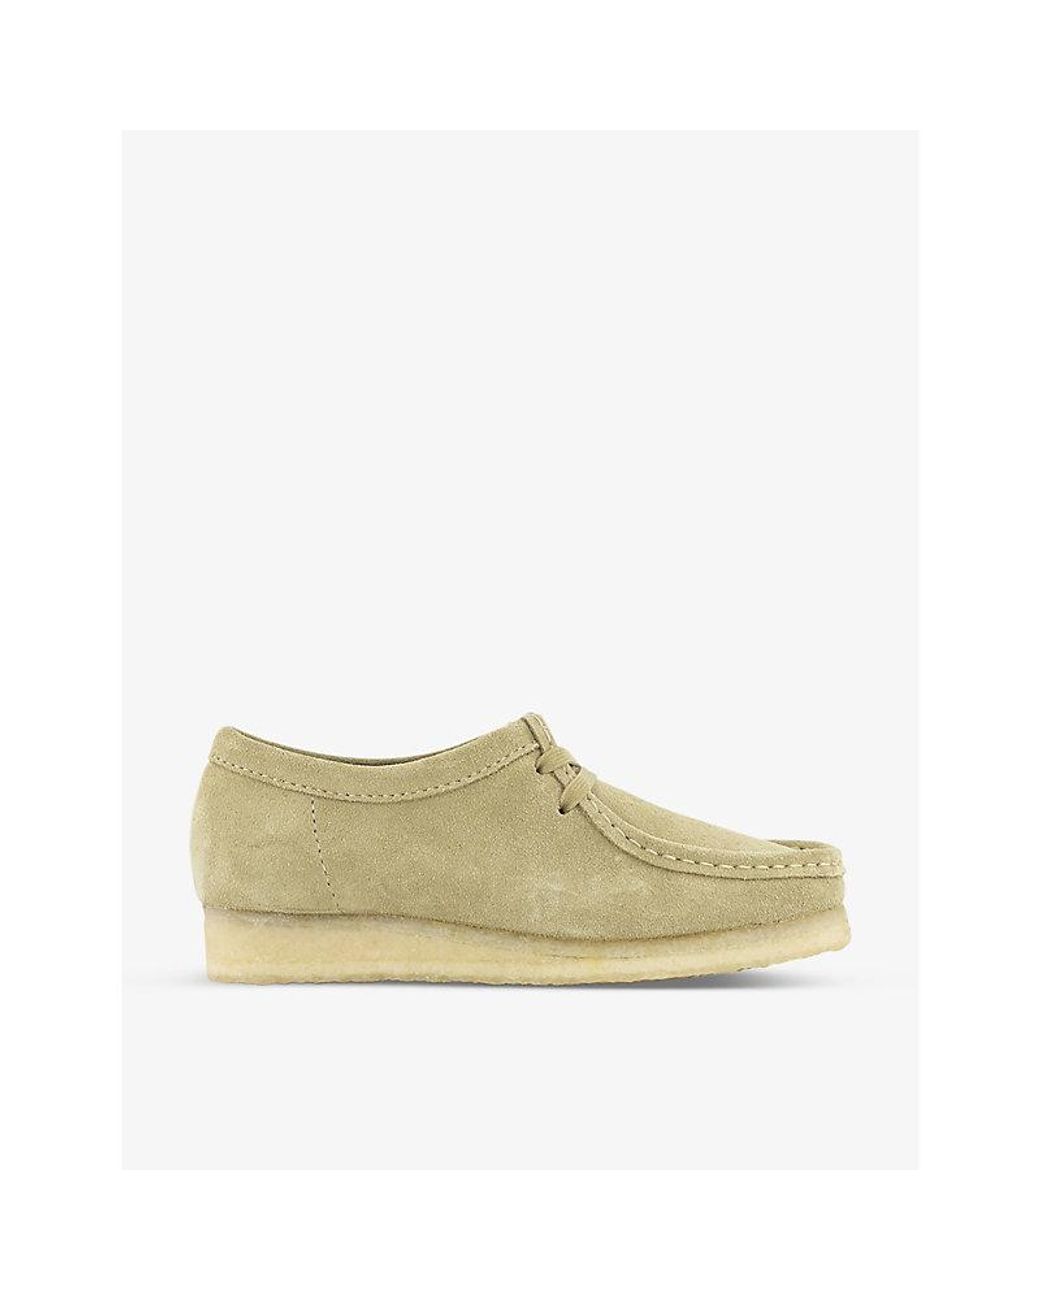 Clarks Wallabee Suede Shoes | Lyst